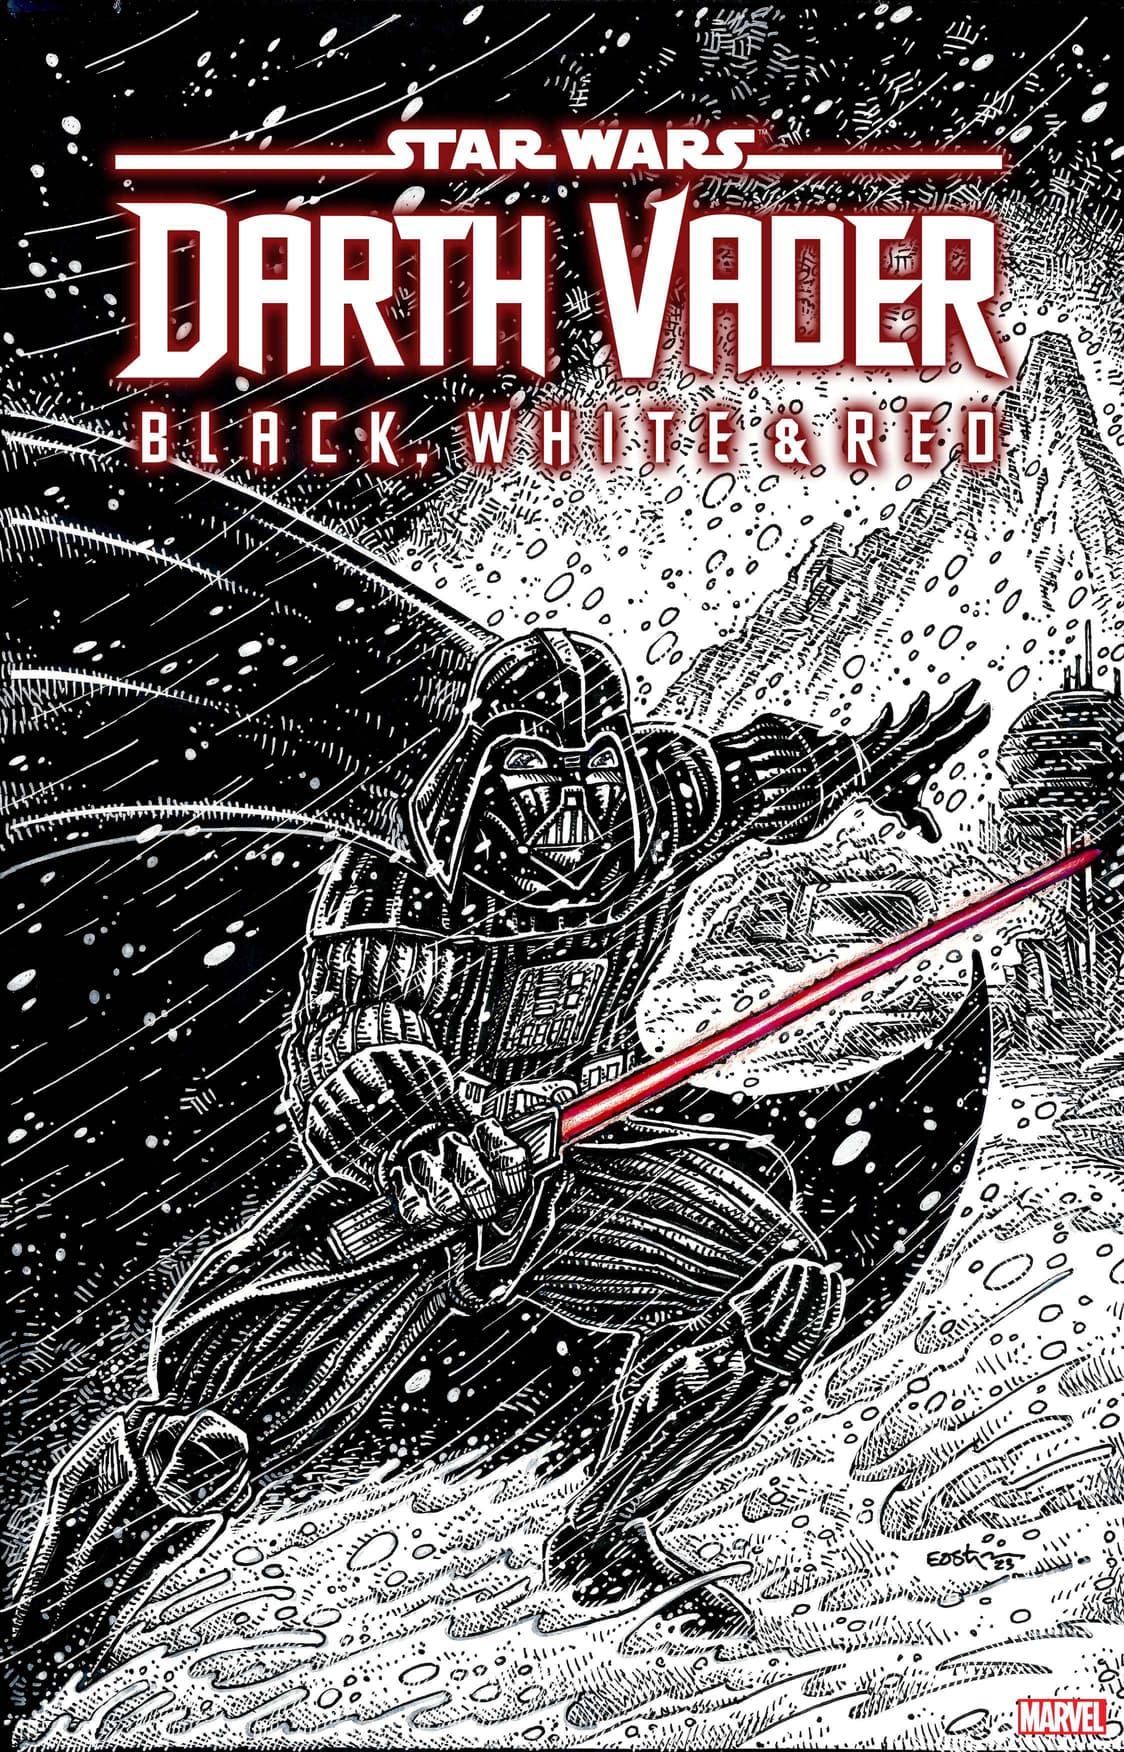 STAR WARS: DARTH VADER – BLACK, WHITE & RED #4 Variant Cover by Kevin Eastman